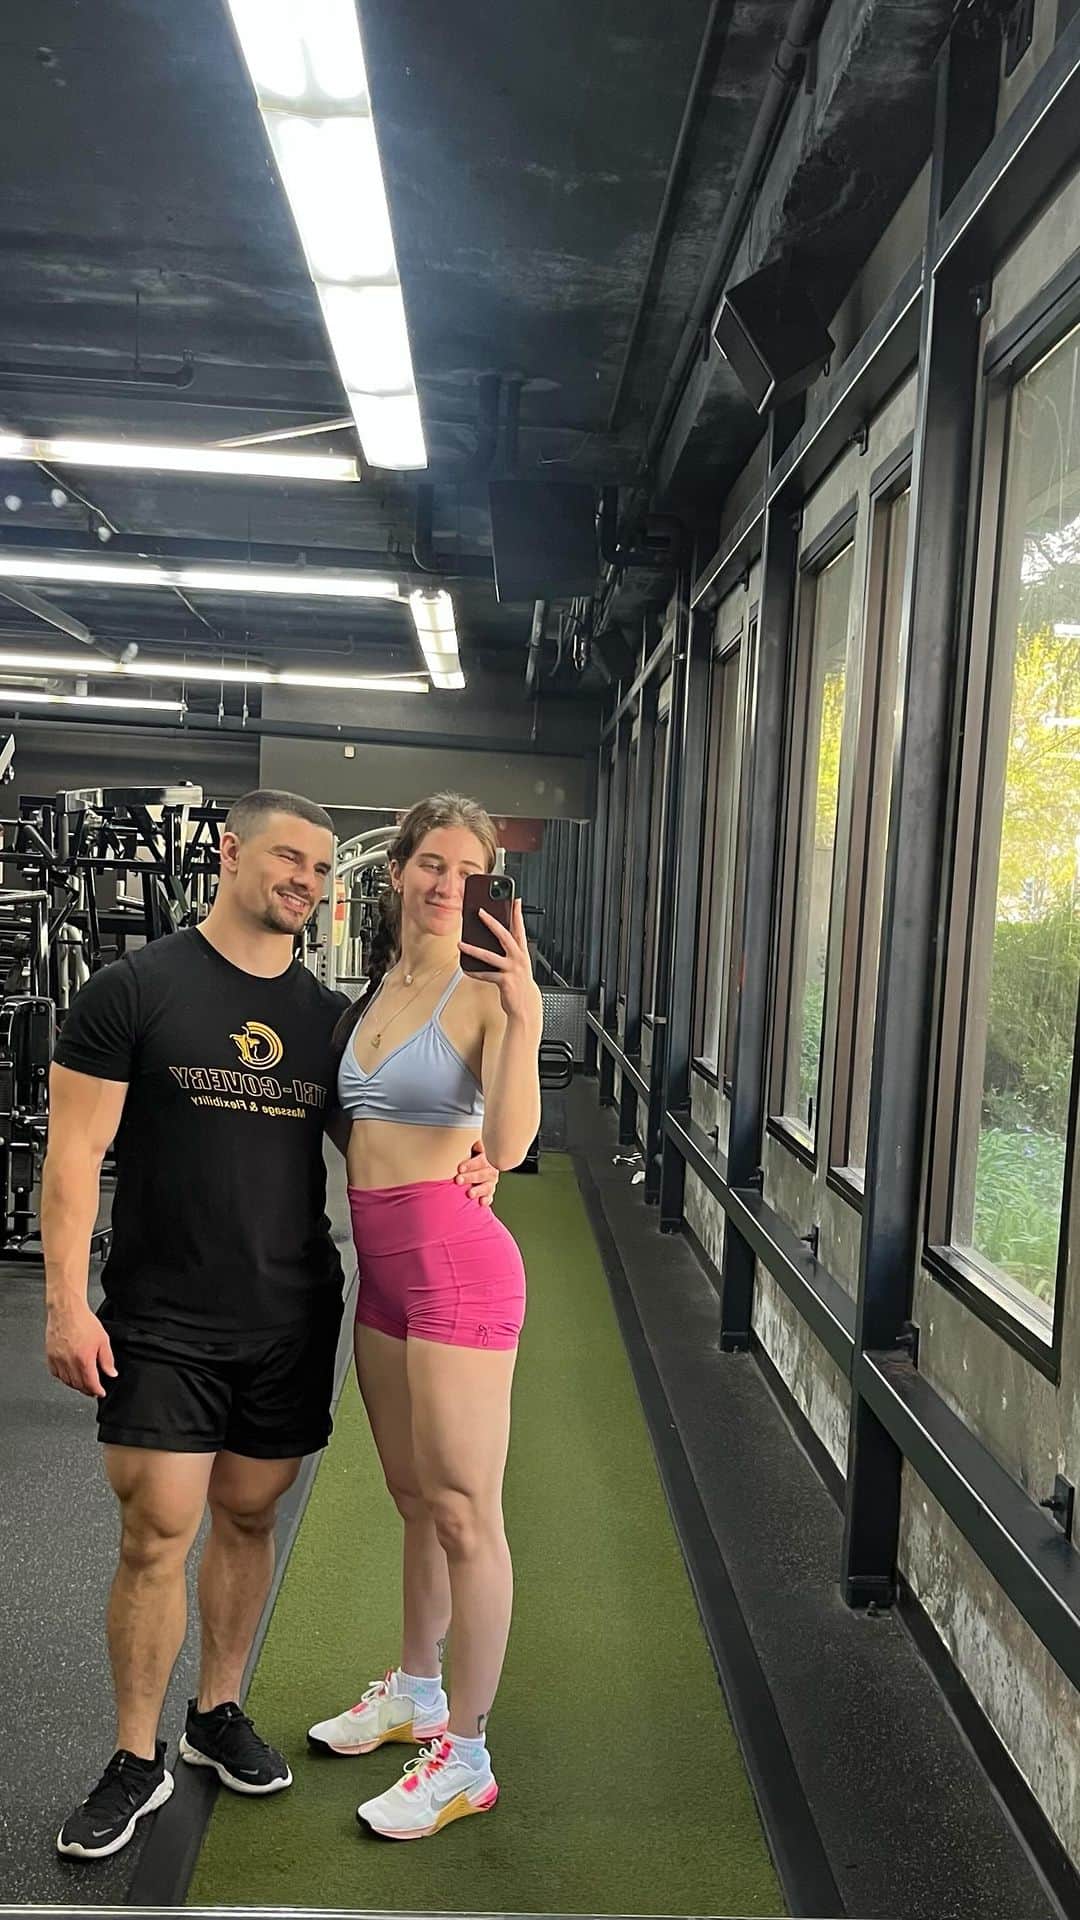 Elliana Shayna Pogrebinskyのインスタグラム：「Monday workouts are more fun together 😜   My back has not been feeling great lately and hurts with a lot of hinging motions, this workout avoided a lot of the exercises that irritated it and felt really good to do!  Give this one a try!  A1: Goblet squat heels elevated  A2: Jefferson Curl (feels so good on the back)  B1: Front sled B2: Lying leg curl  C1: Ab holds」